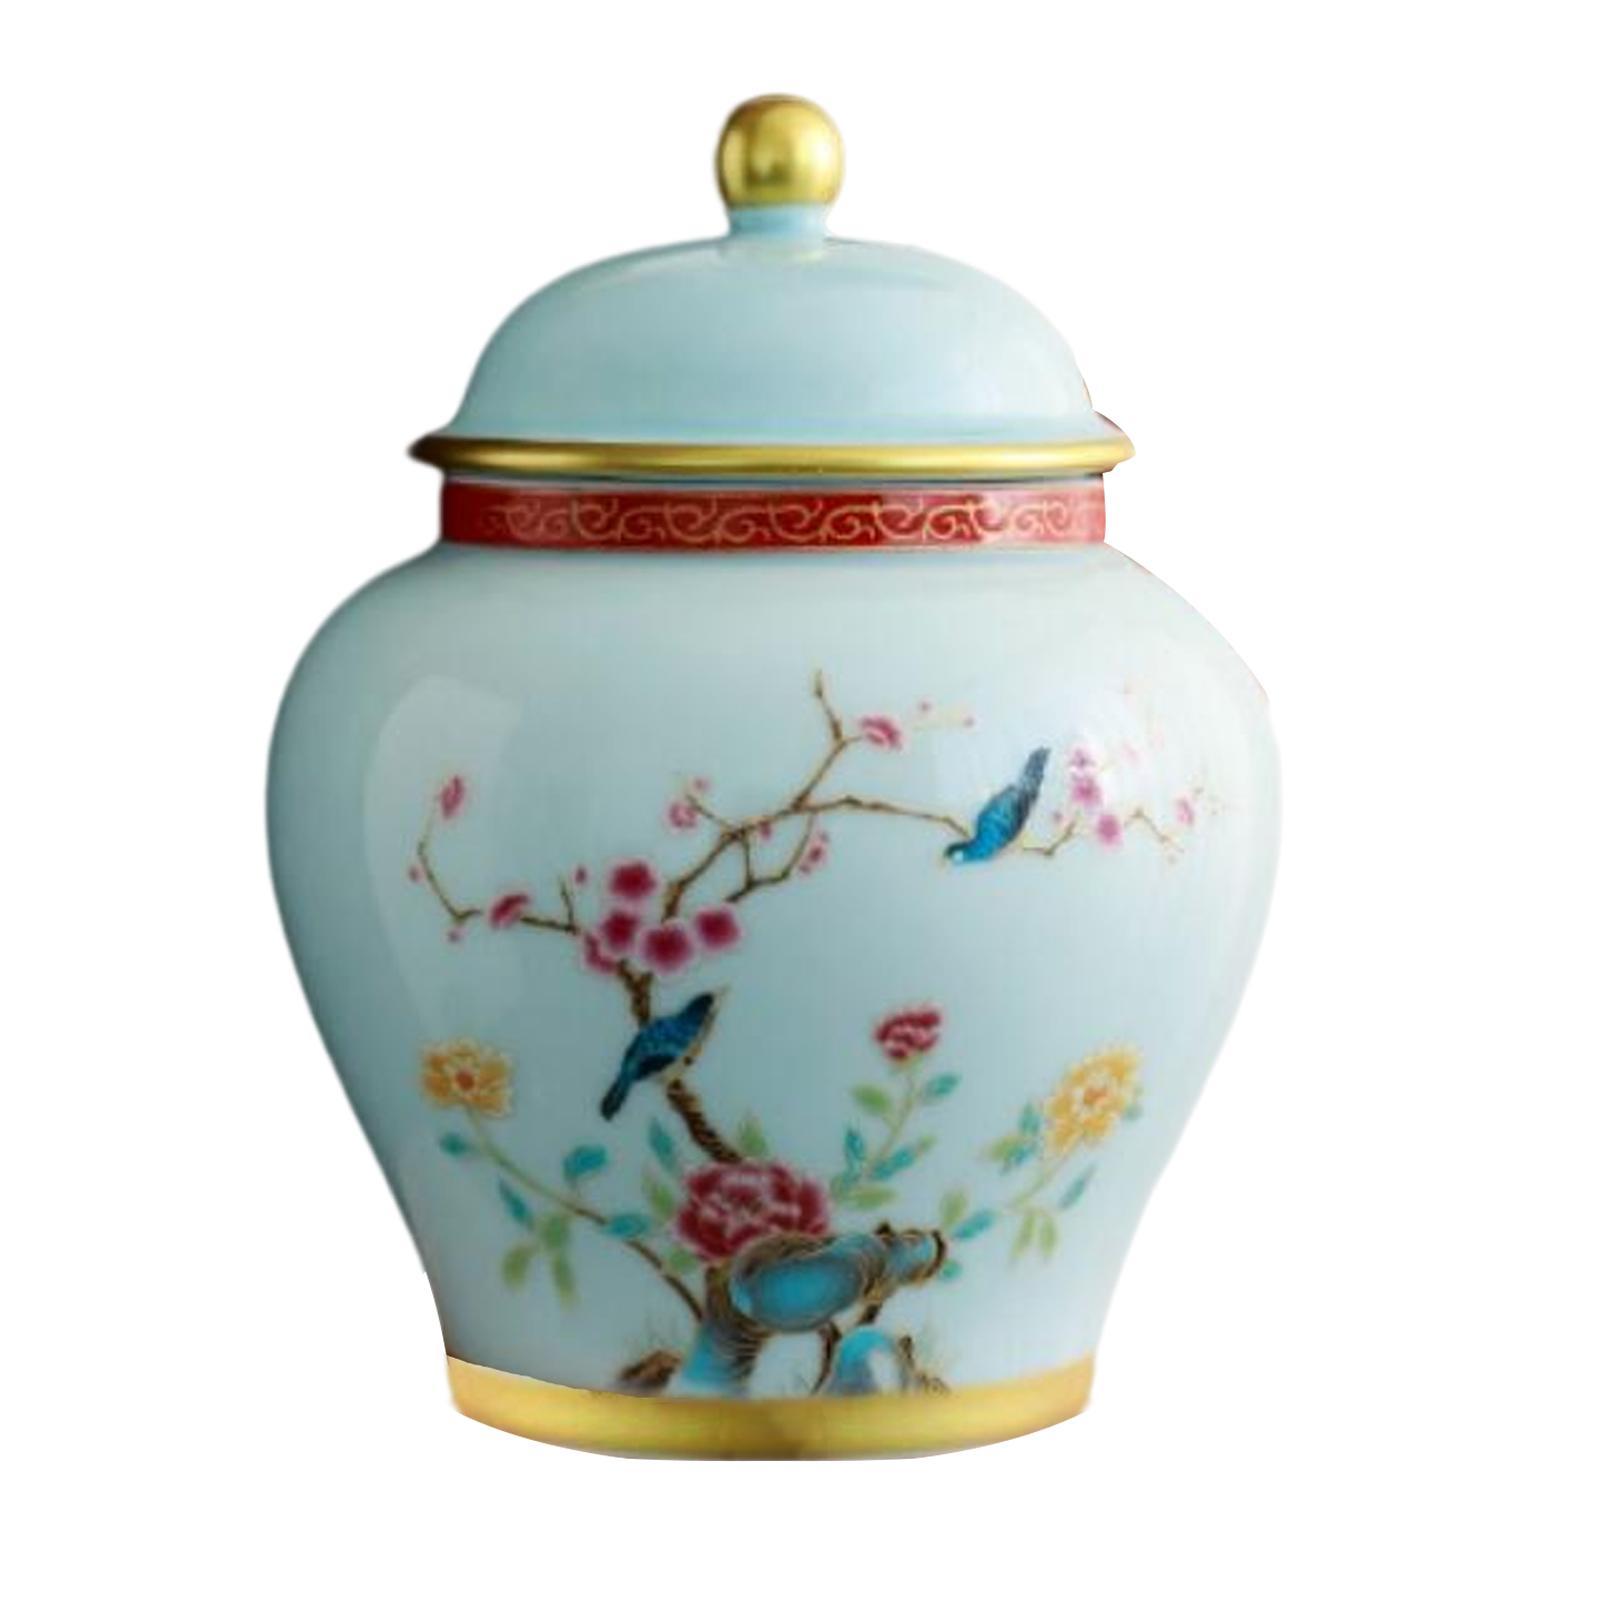 Choose from our selection of decorative urn dd for a unique and elegant touch